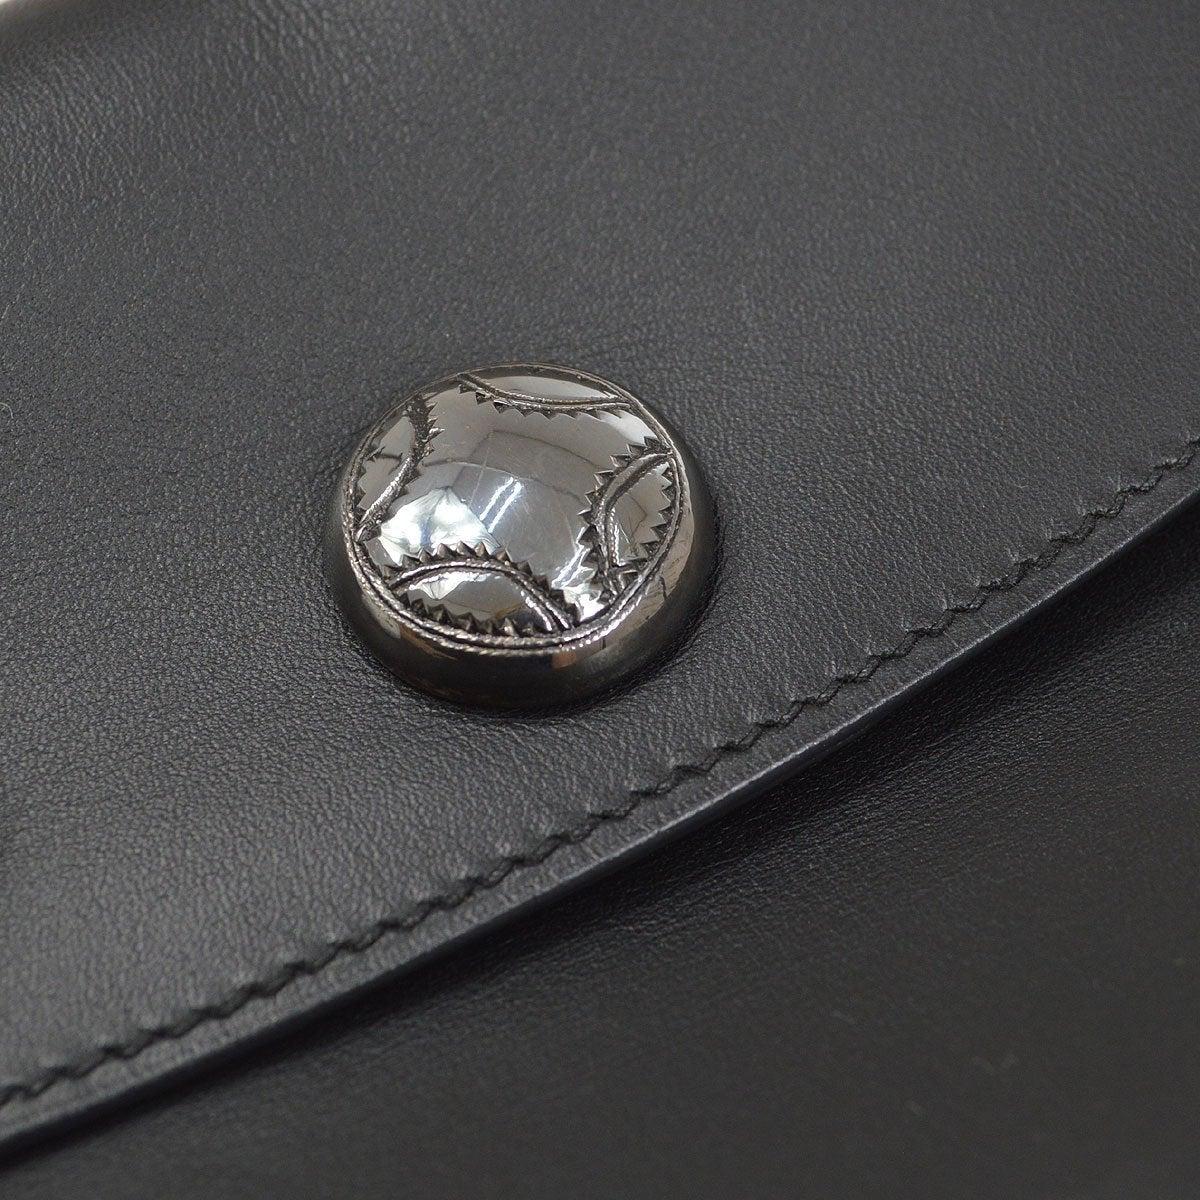 Pre-Owned Vintage Condition
From 2002 Collection
Box Calfskin Leather
Leather Lining
Silver Tone Hardware
Measures 10